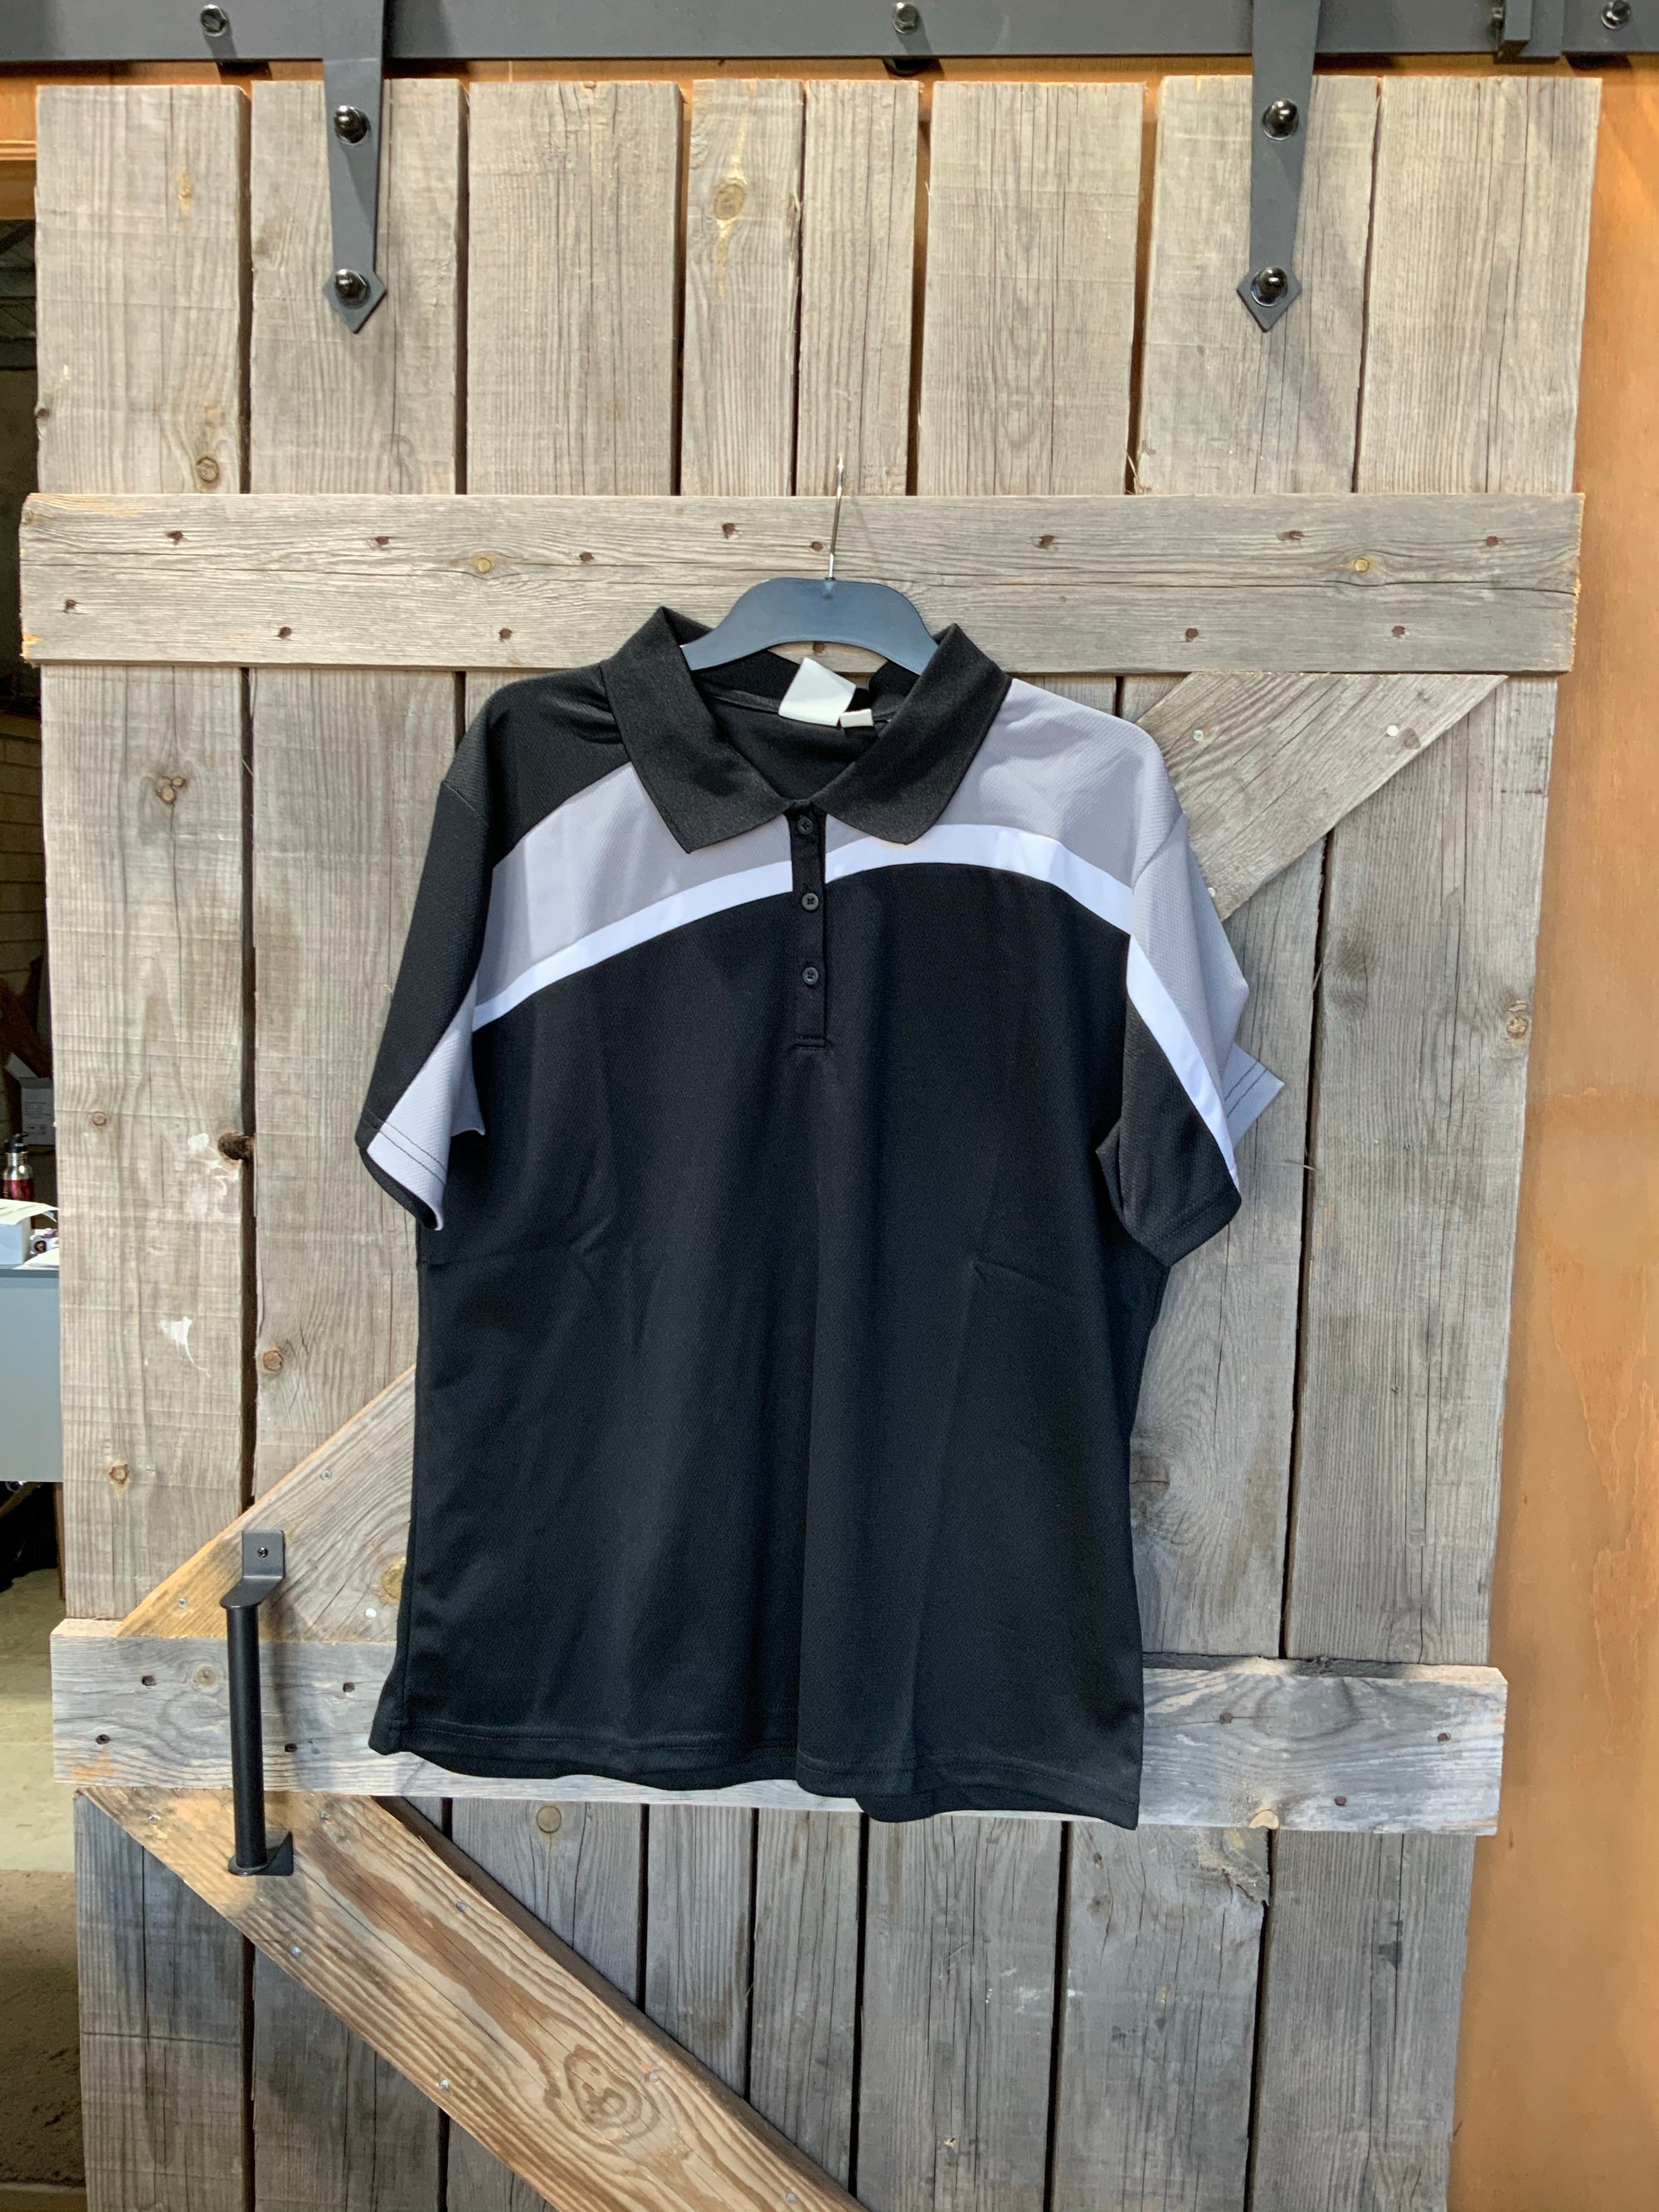 Biz collection ladies black and grey polo size 18